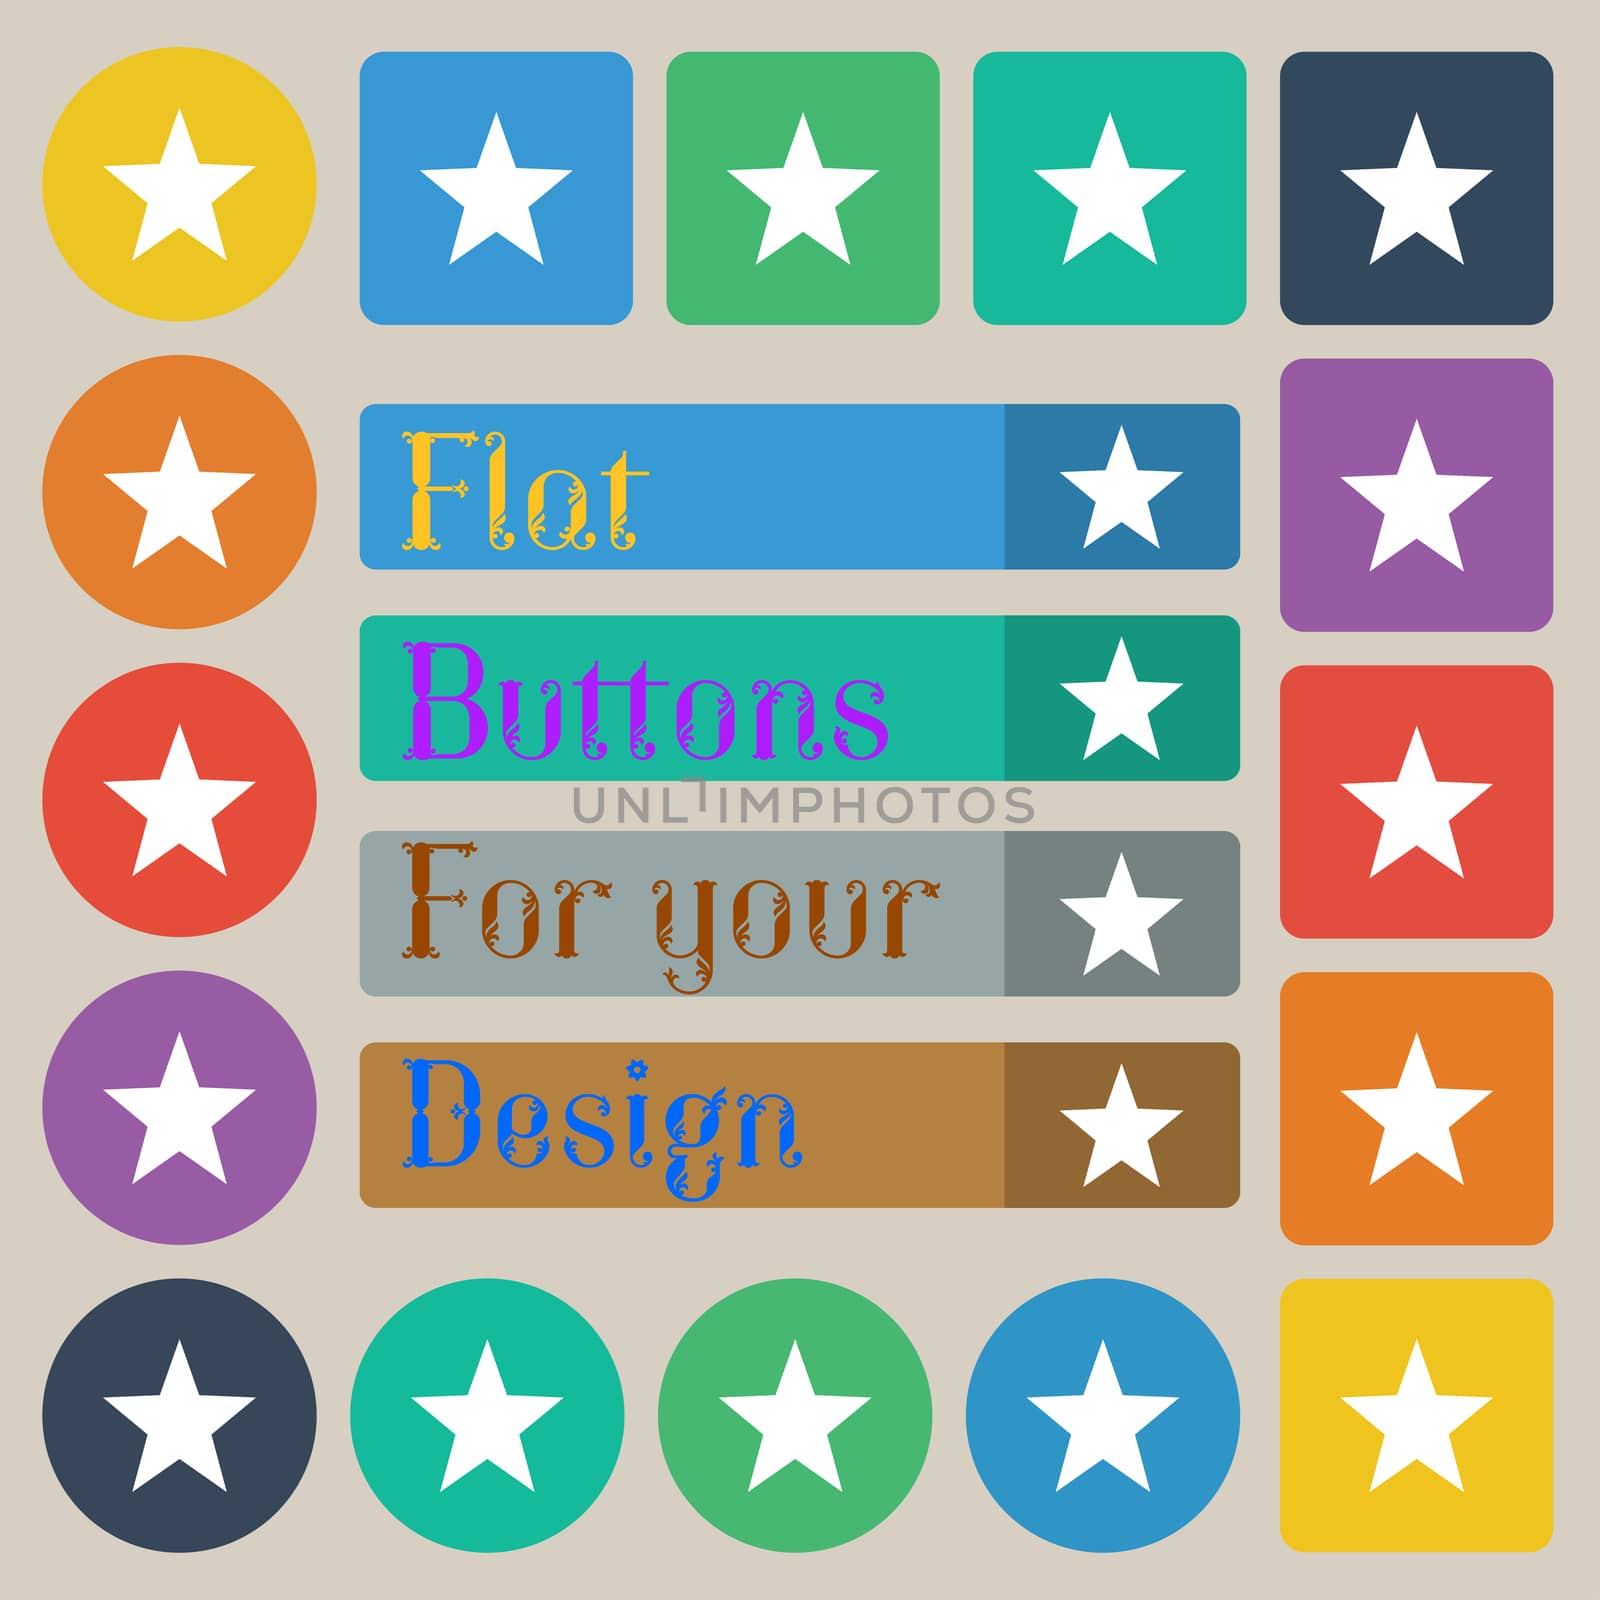 Star, Favorite icon sign. Set of twenty colored flat, round, square and rectangular buttons. illustration